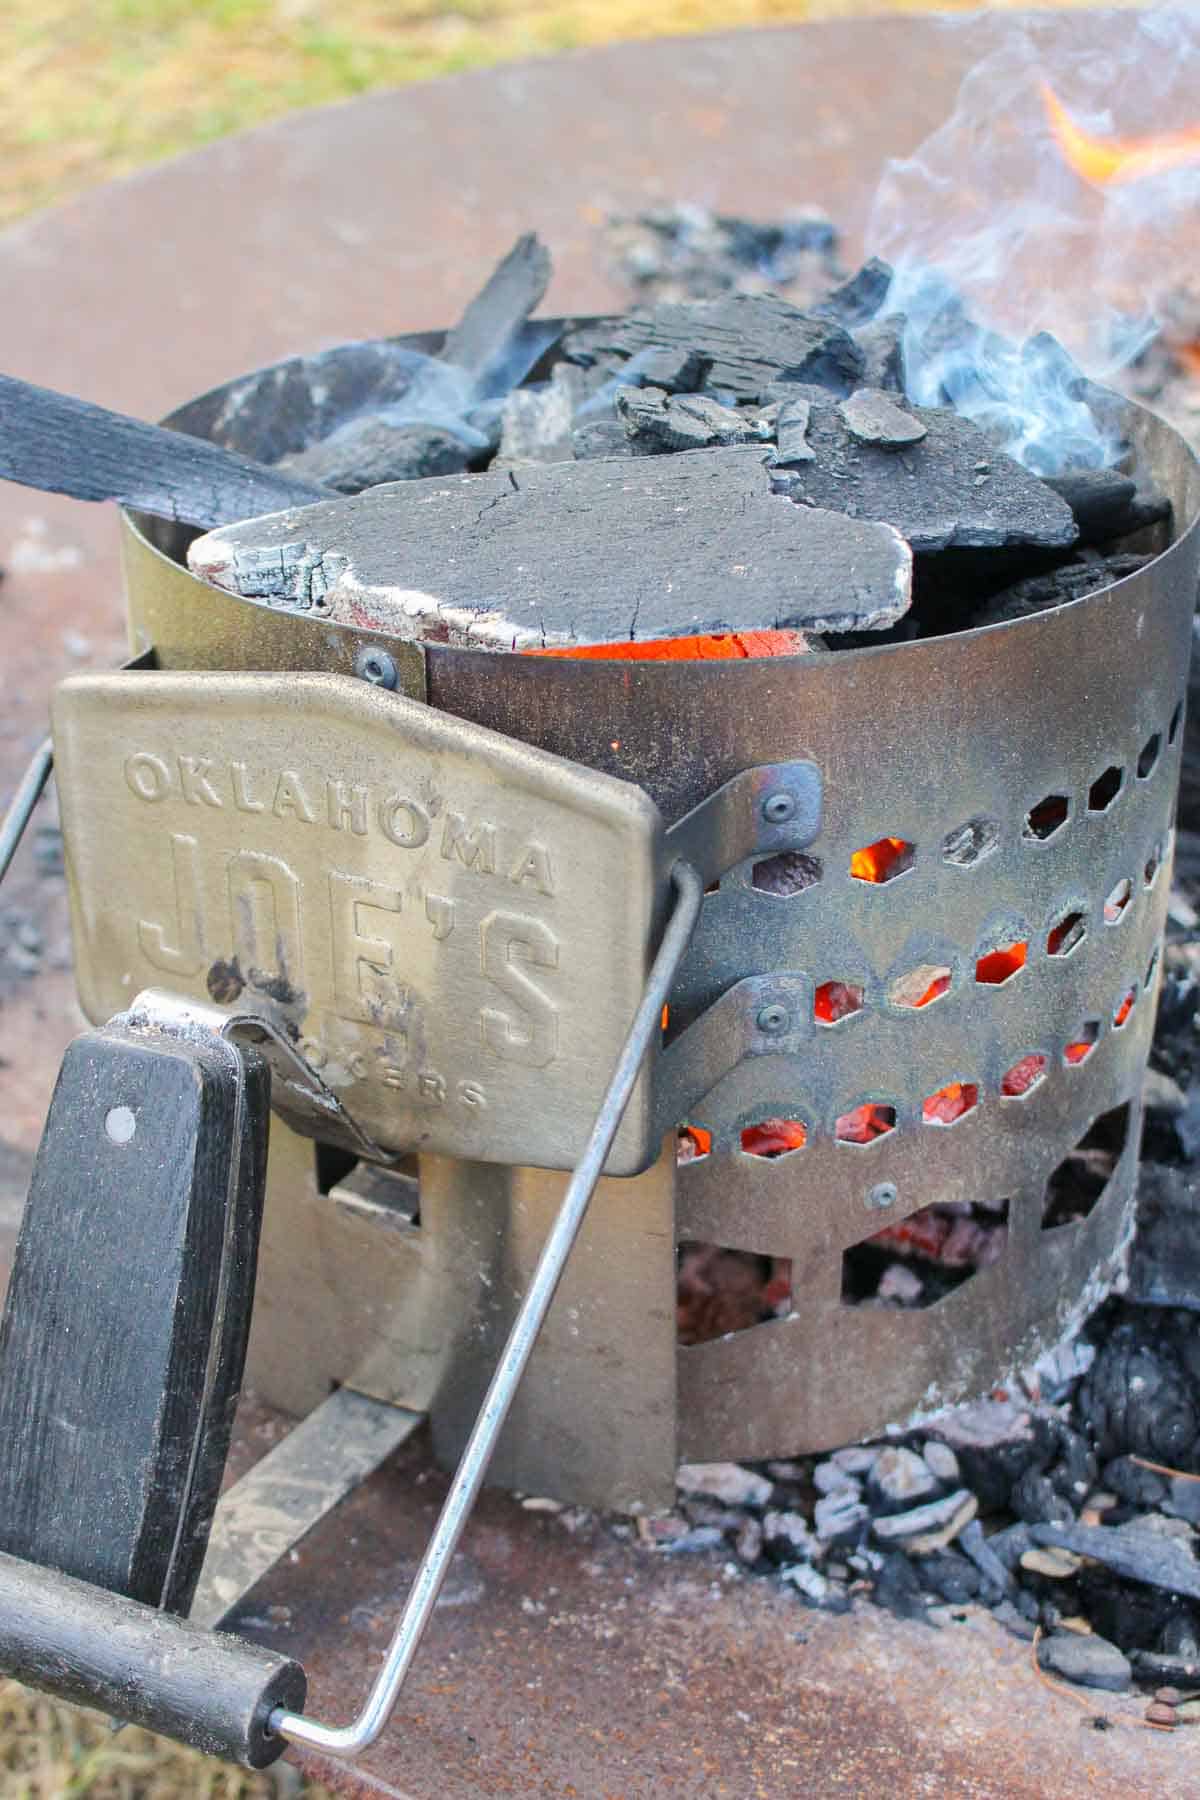 Some charcoal heating up as we kick off our Food Trend Predictions for 2023 article. 